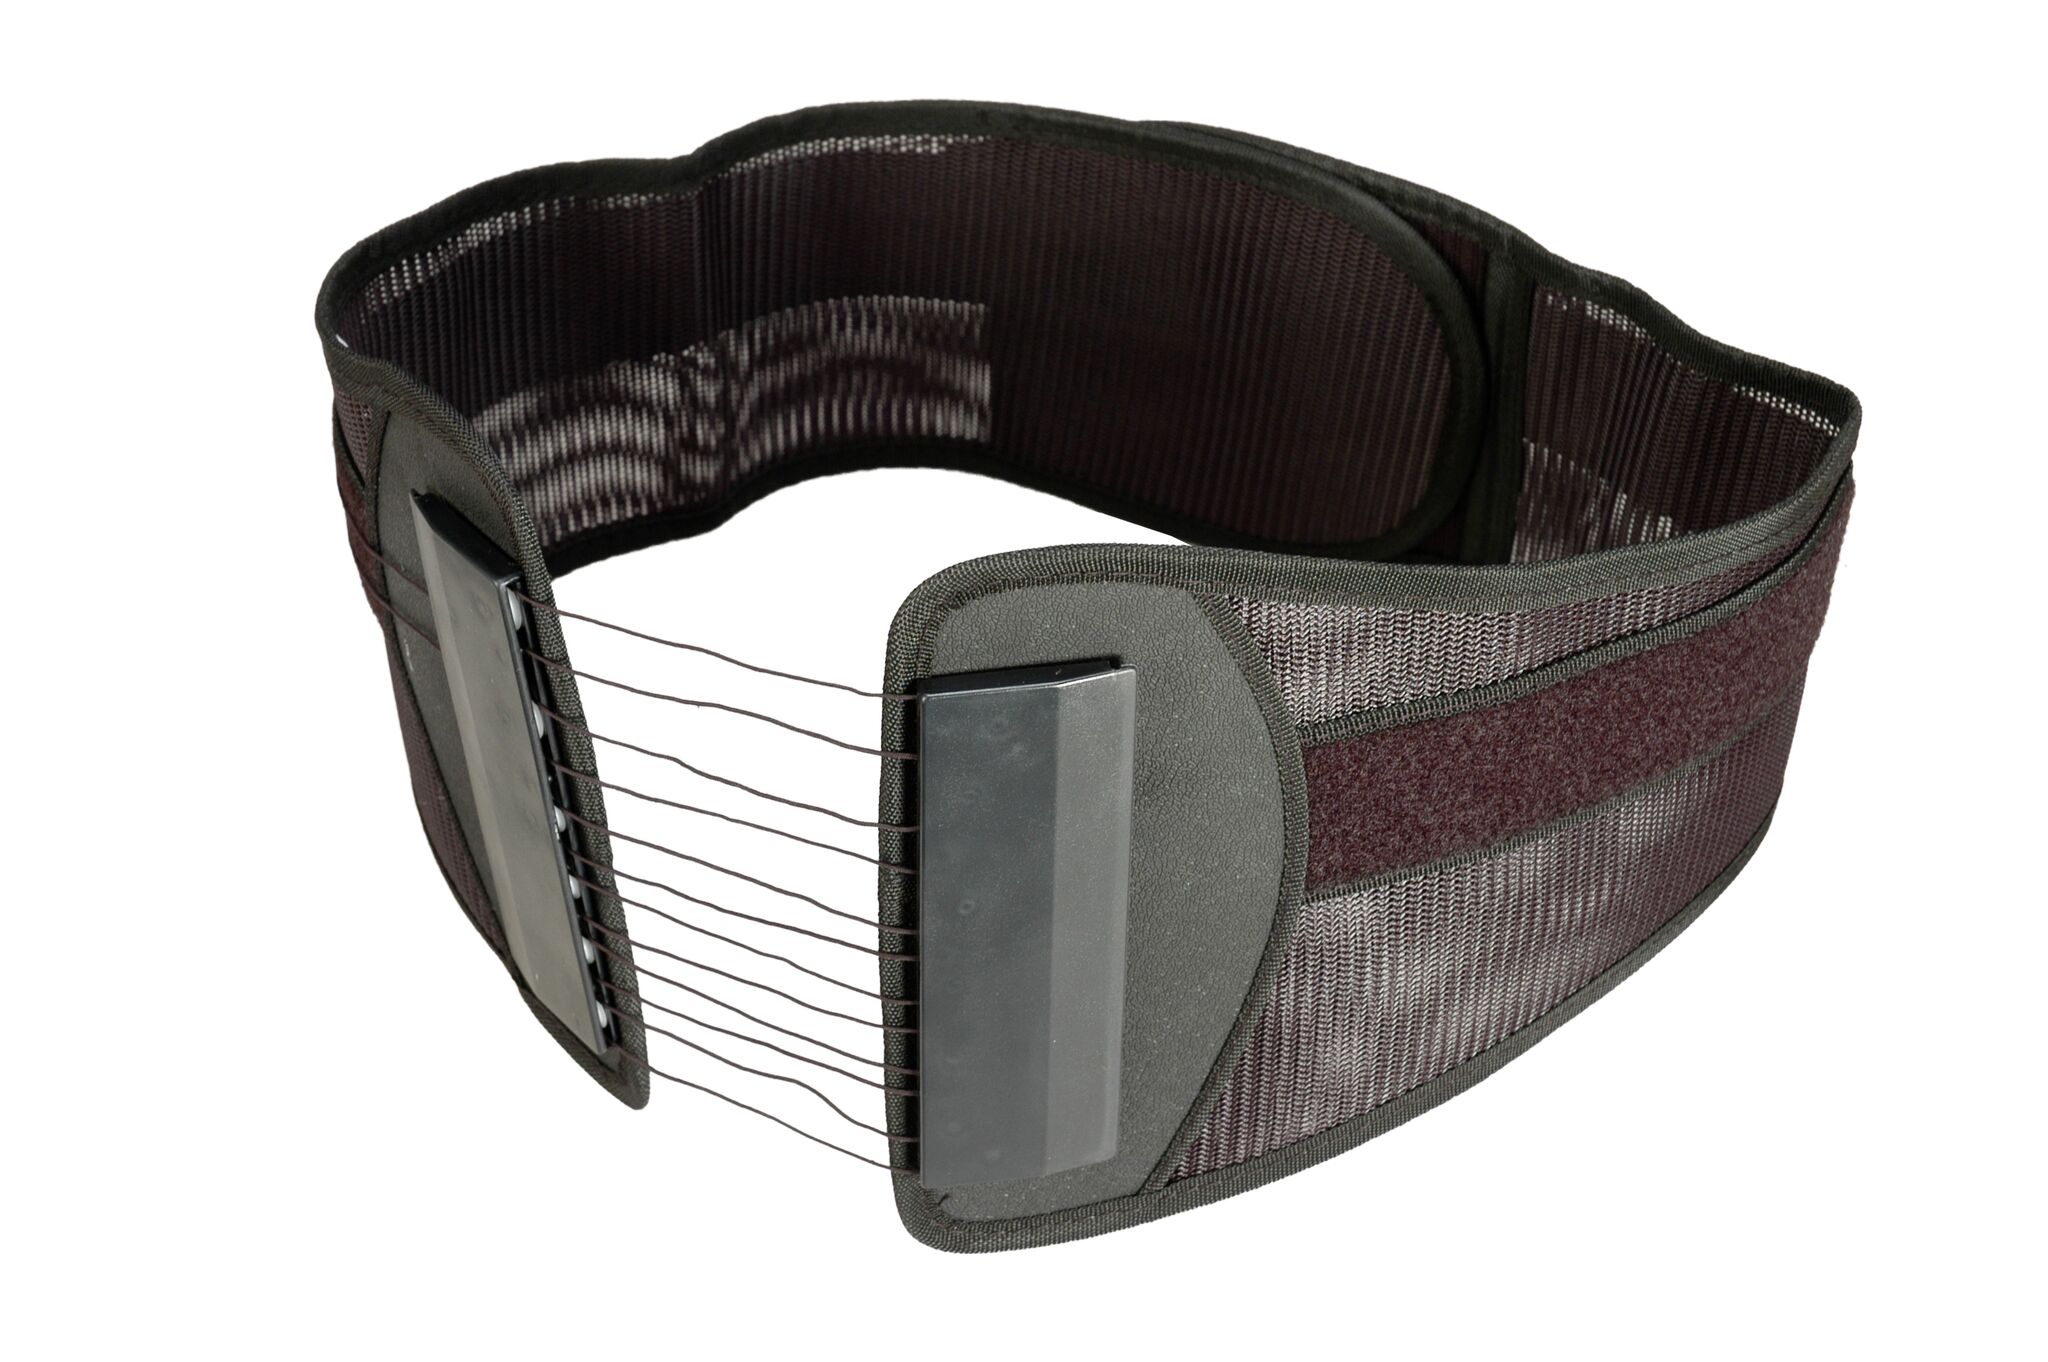 Super Cinch Belt for Lead Apron Support - USAXRAY